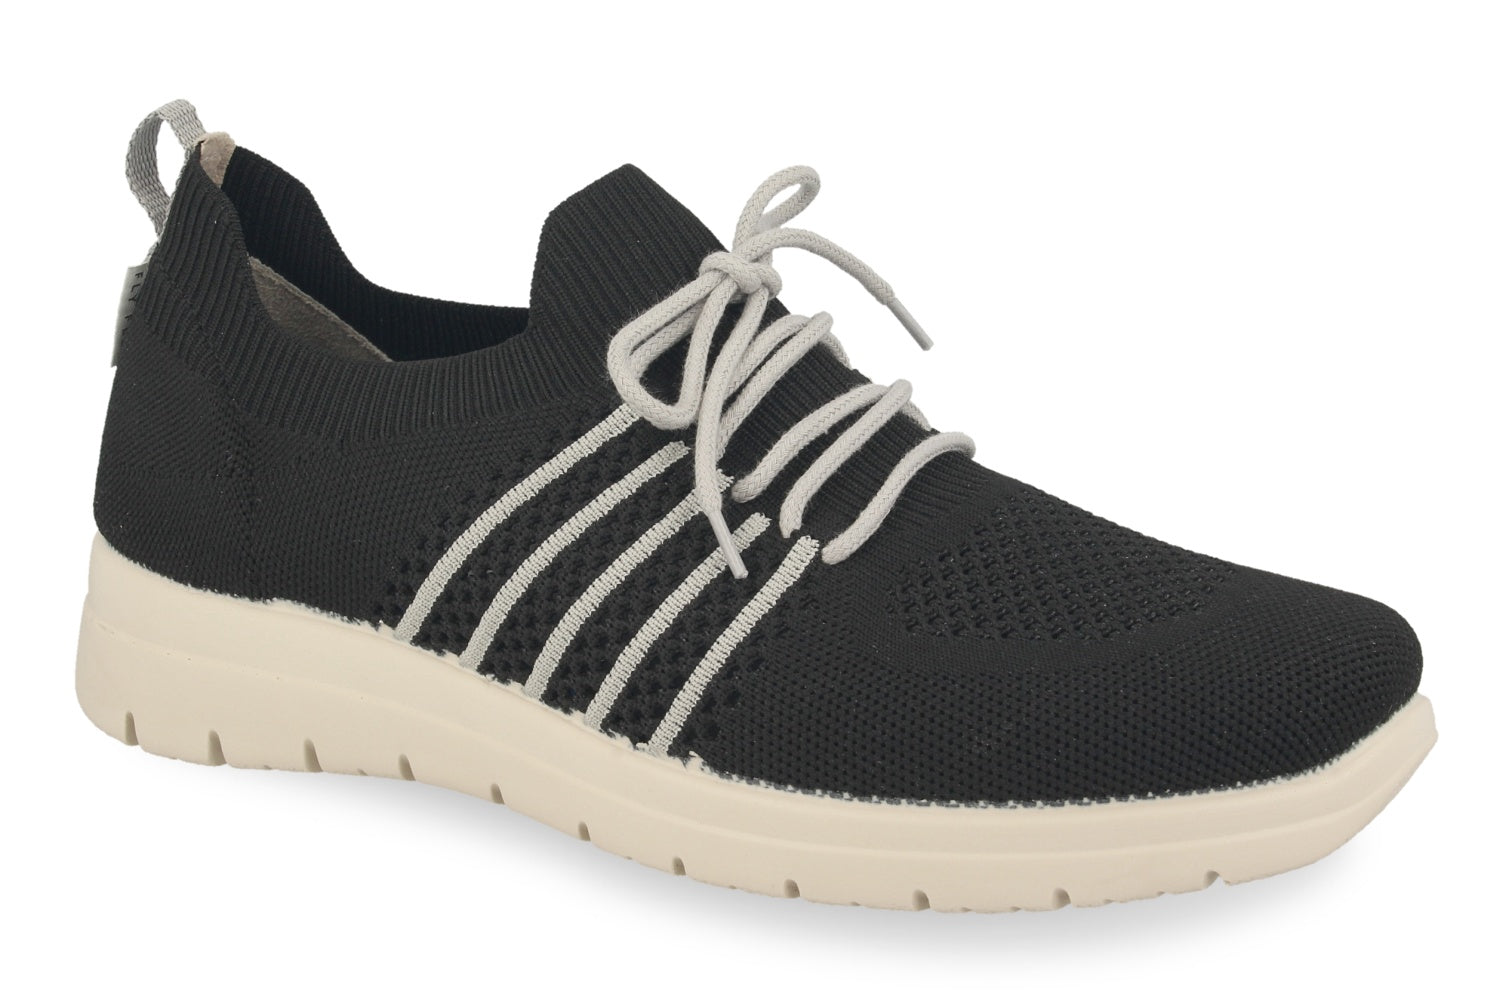 See the Lace-Up Sneakers Men Shoes With Memory Insole in the colour BLACK, available in various sizes